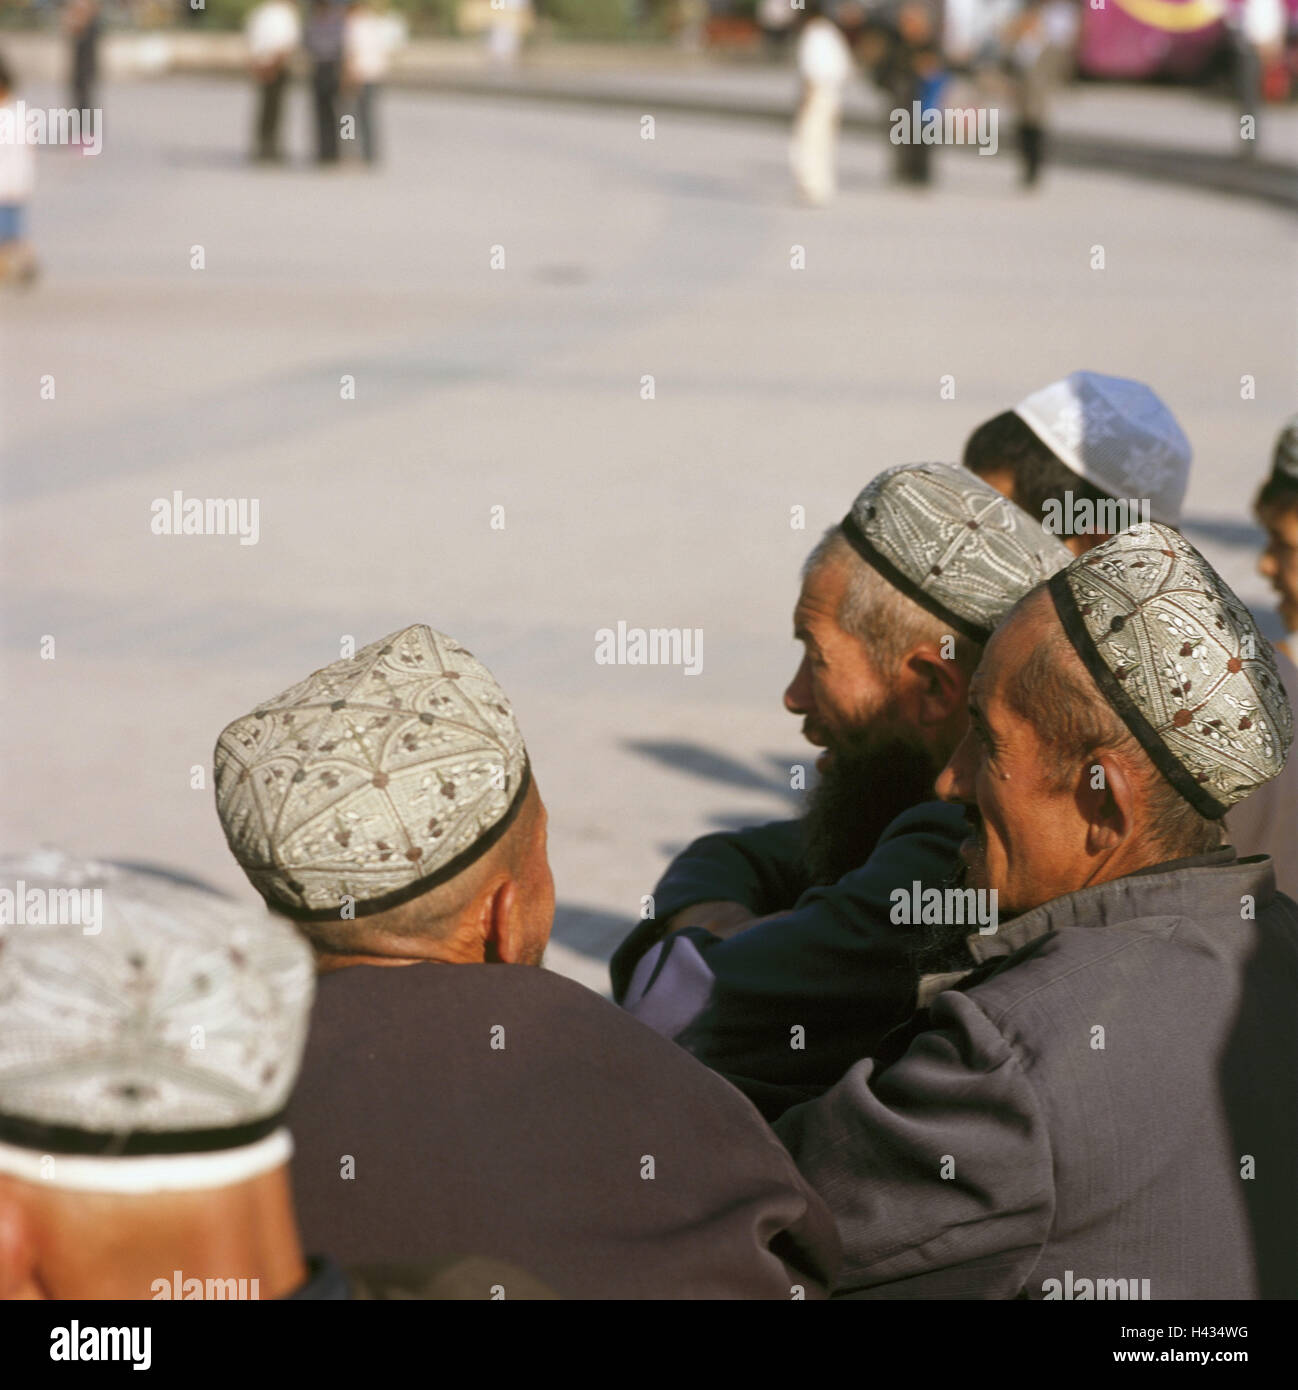 China, region Sinkiang, Framing-even, Id Kah Mosque Square, senior citizens, no model release, Asia, Silk Road, Xinjiang, Kashi, town view, town, city centre, space, person, Uiguren, Muslim, group, zusammensitzen, men, old, Muslims, uigurisch, headgears, caps, caps, traditionally, typically, curled, outside, Stock Photo